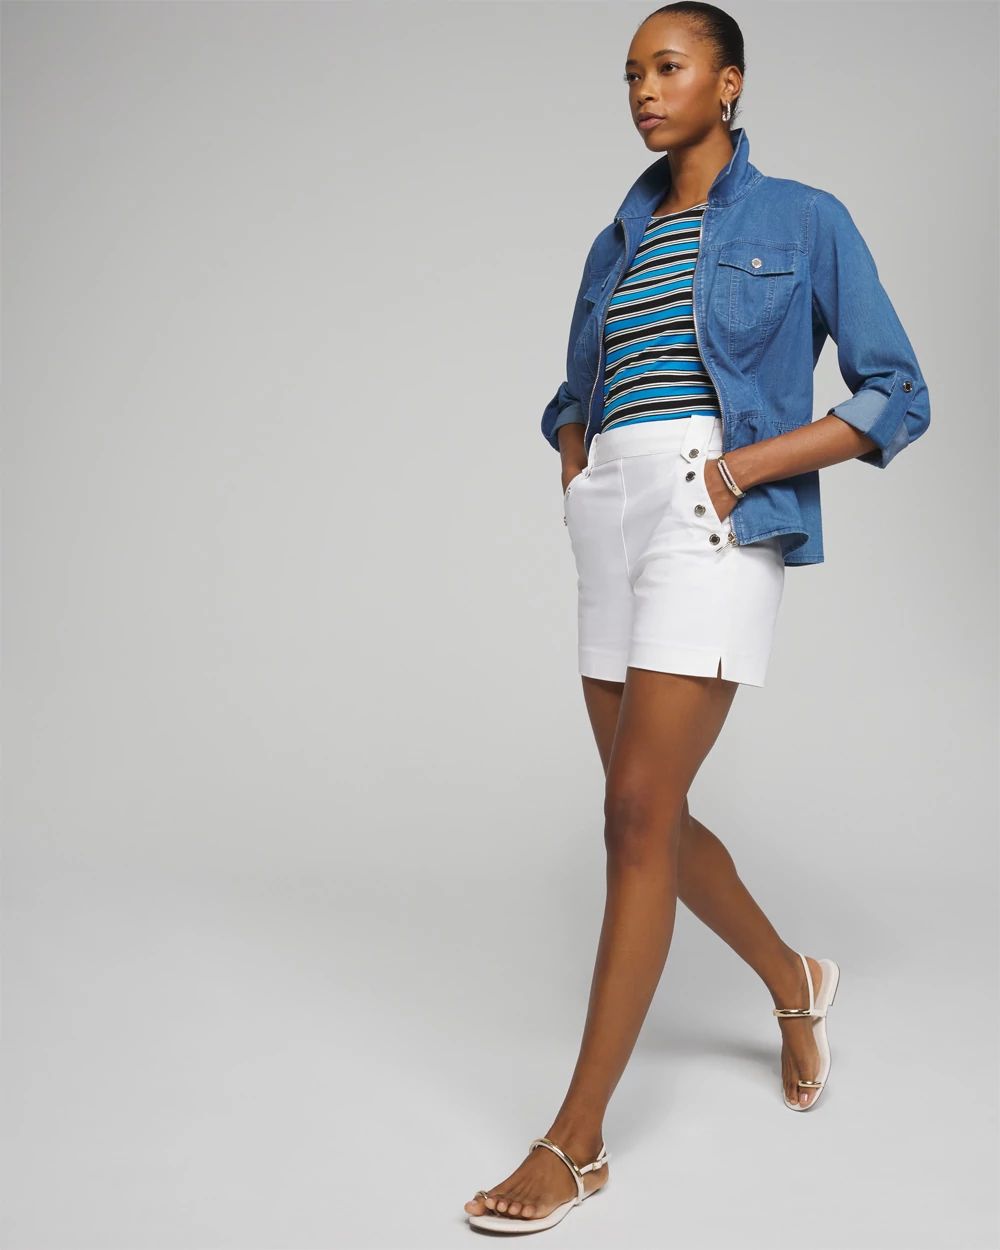 Outlet WHBM Button Shorts